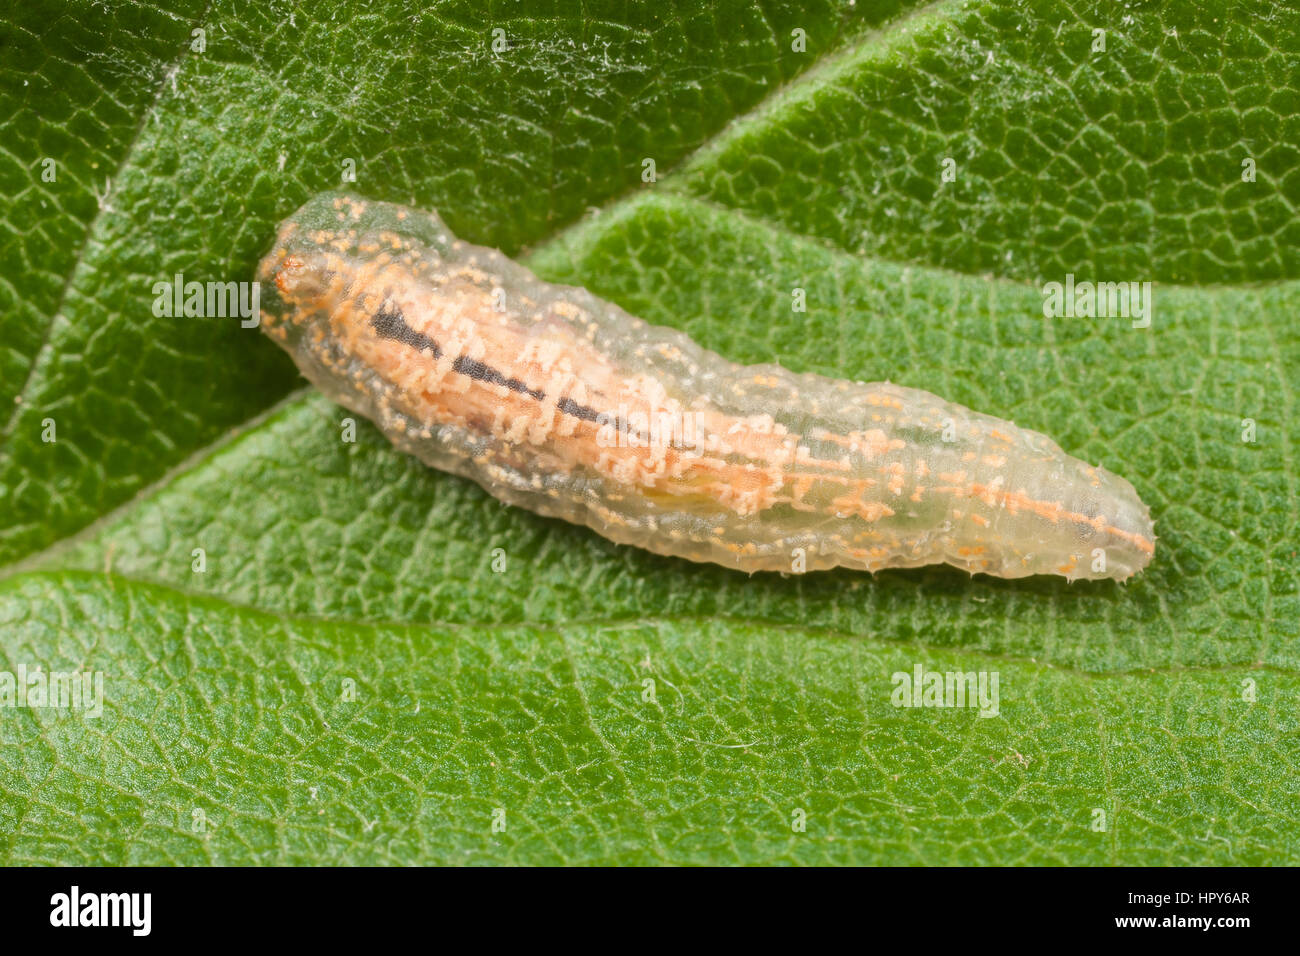 A Syrphid Fly (Syrphus sp.) larva on a leaf. Stock Photo